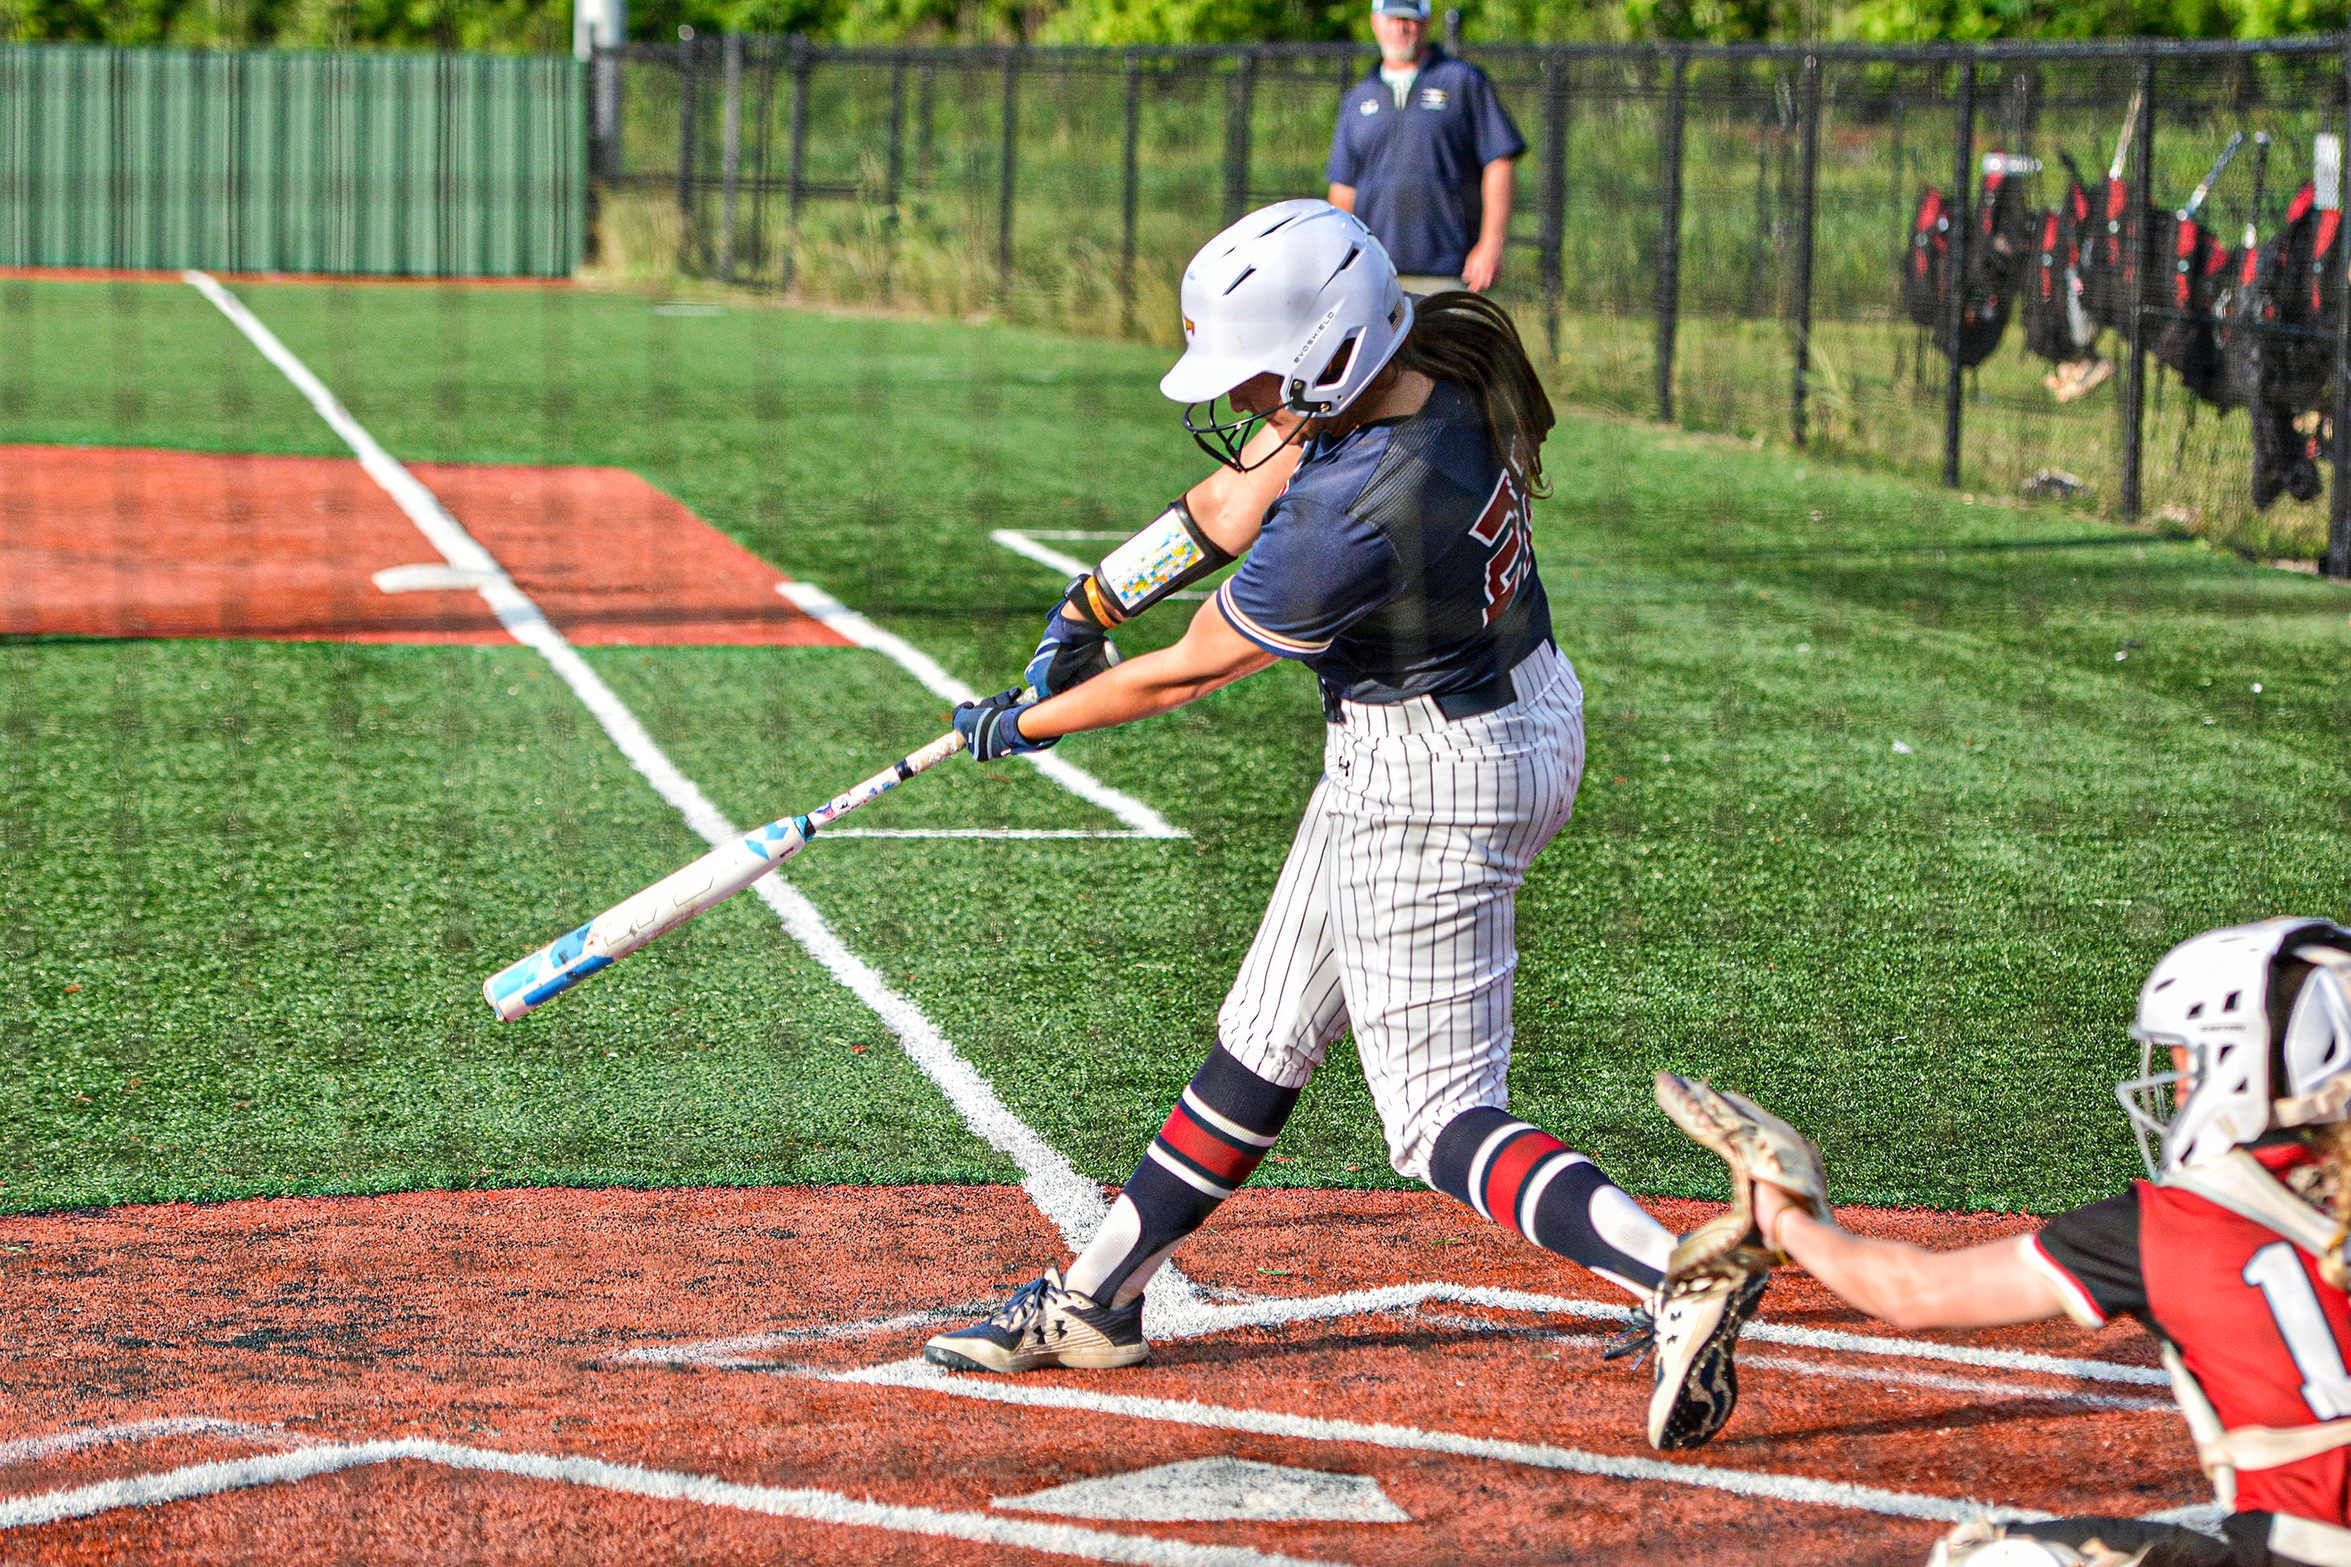 Softball season comes to an end in final day of RRAC tournament